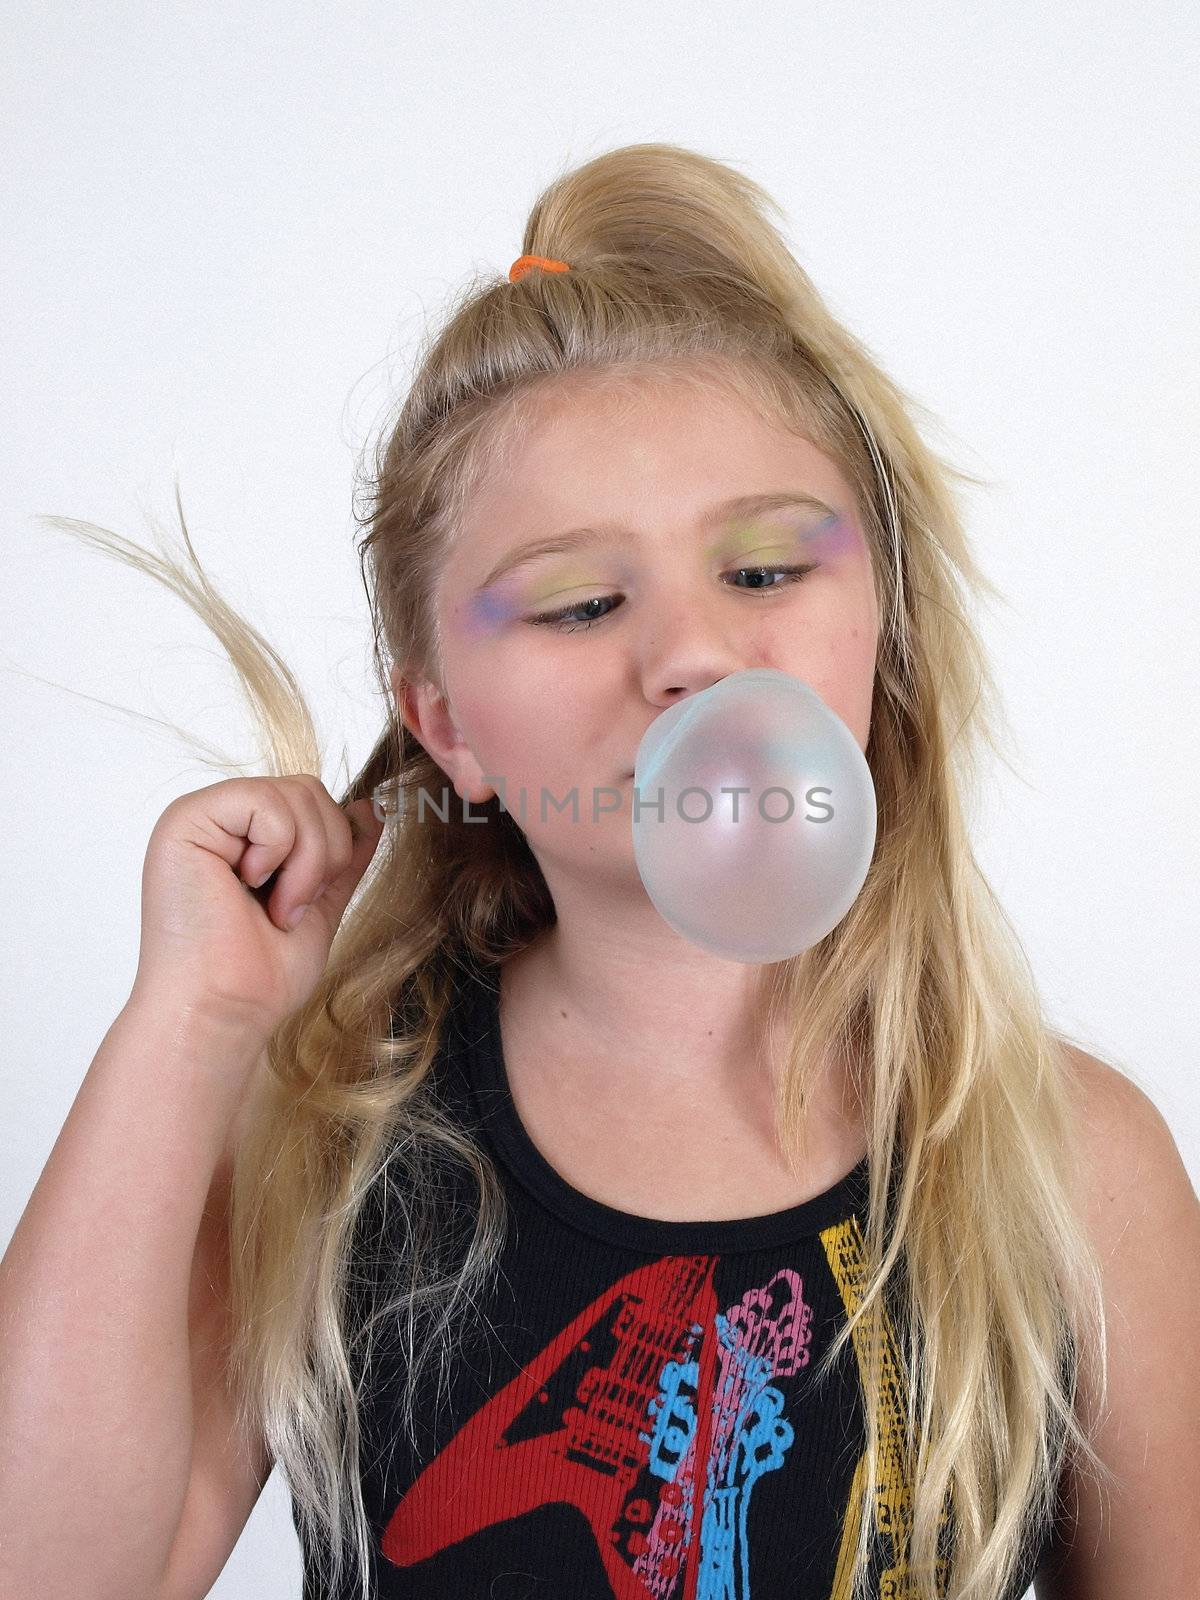 A young blonde girl blowing a bubble and twisting her hair.